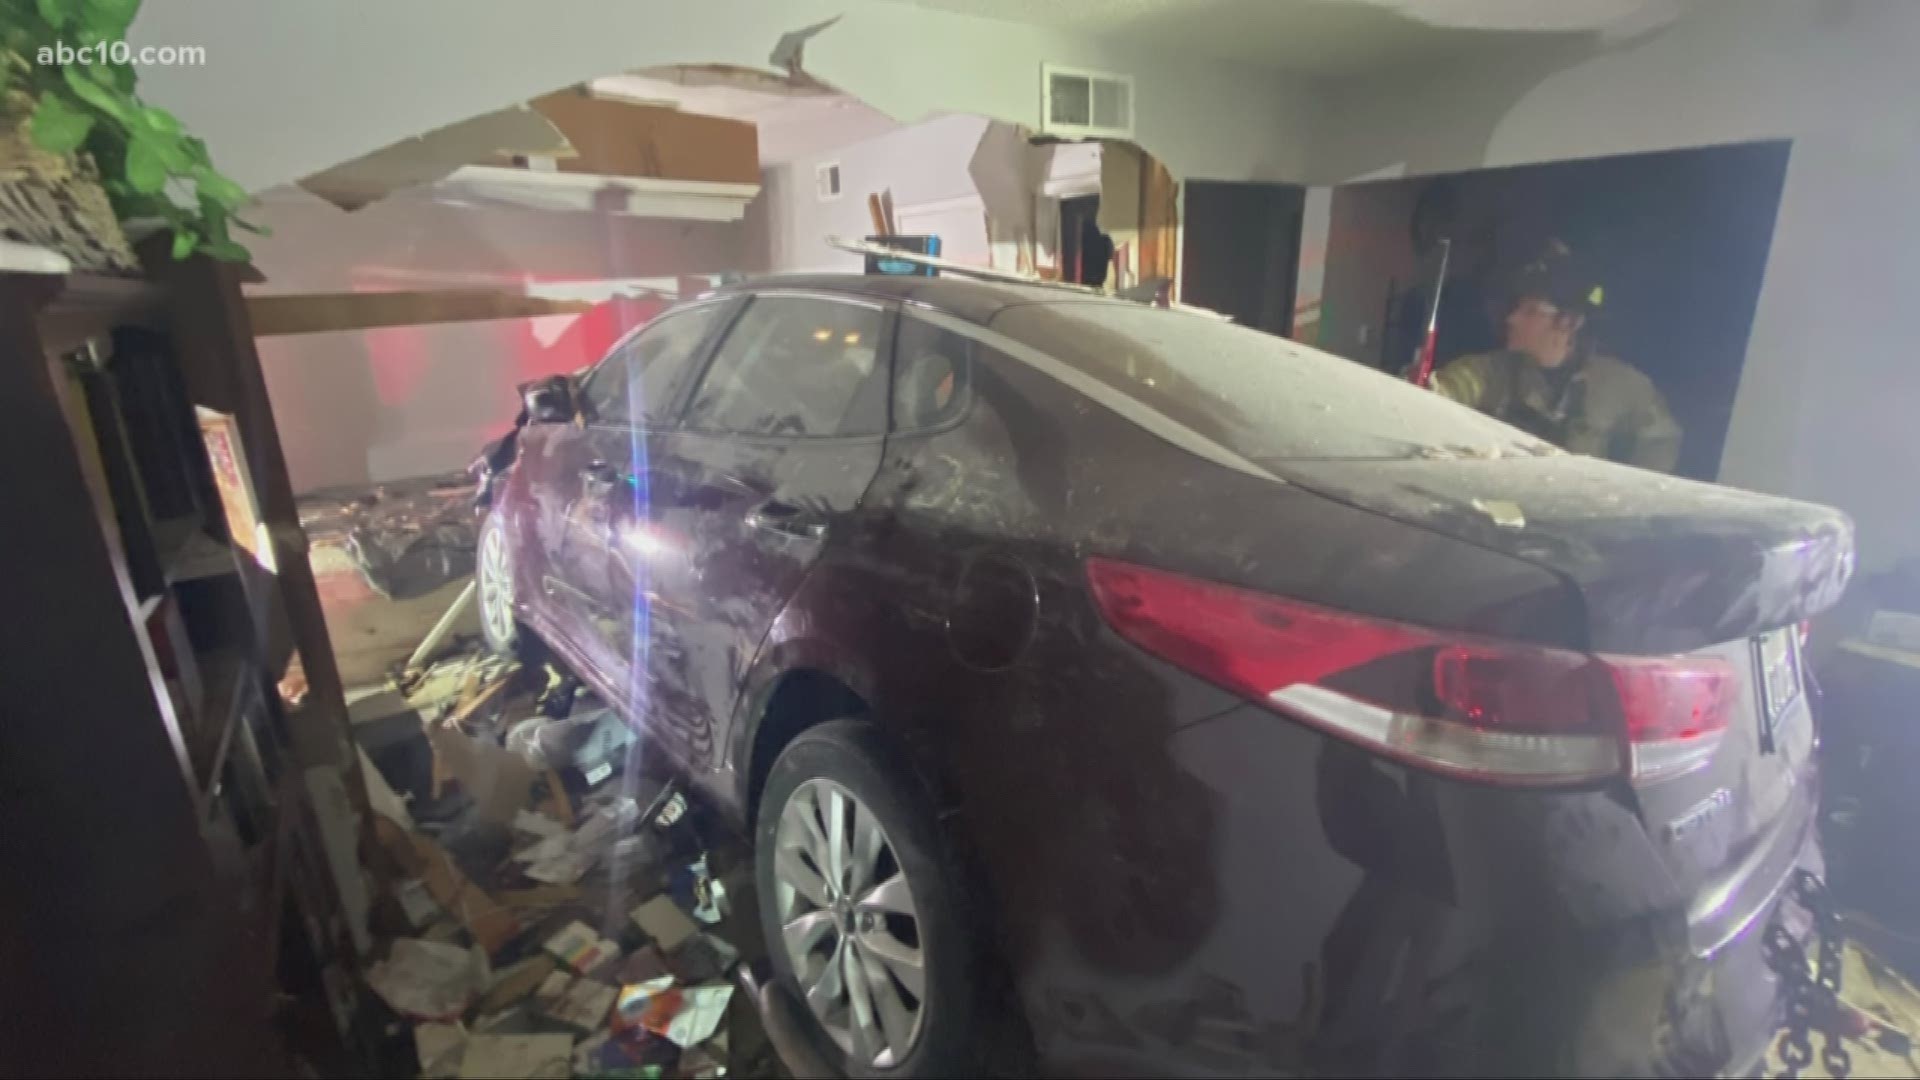 Community members said that it's not gunshots they have to worry about, it's traffic after a car crashed into a Rancho Cordova home that killed an elderly woman.